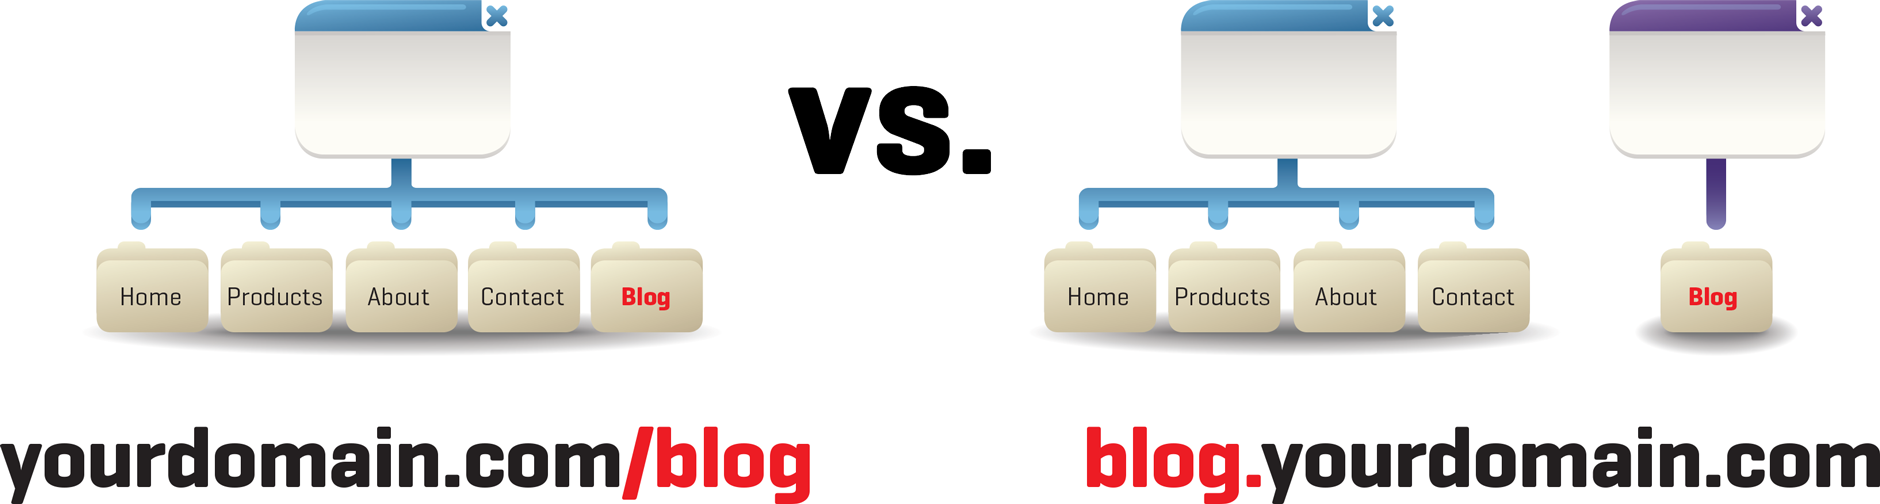 Information architecture options for blogs